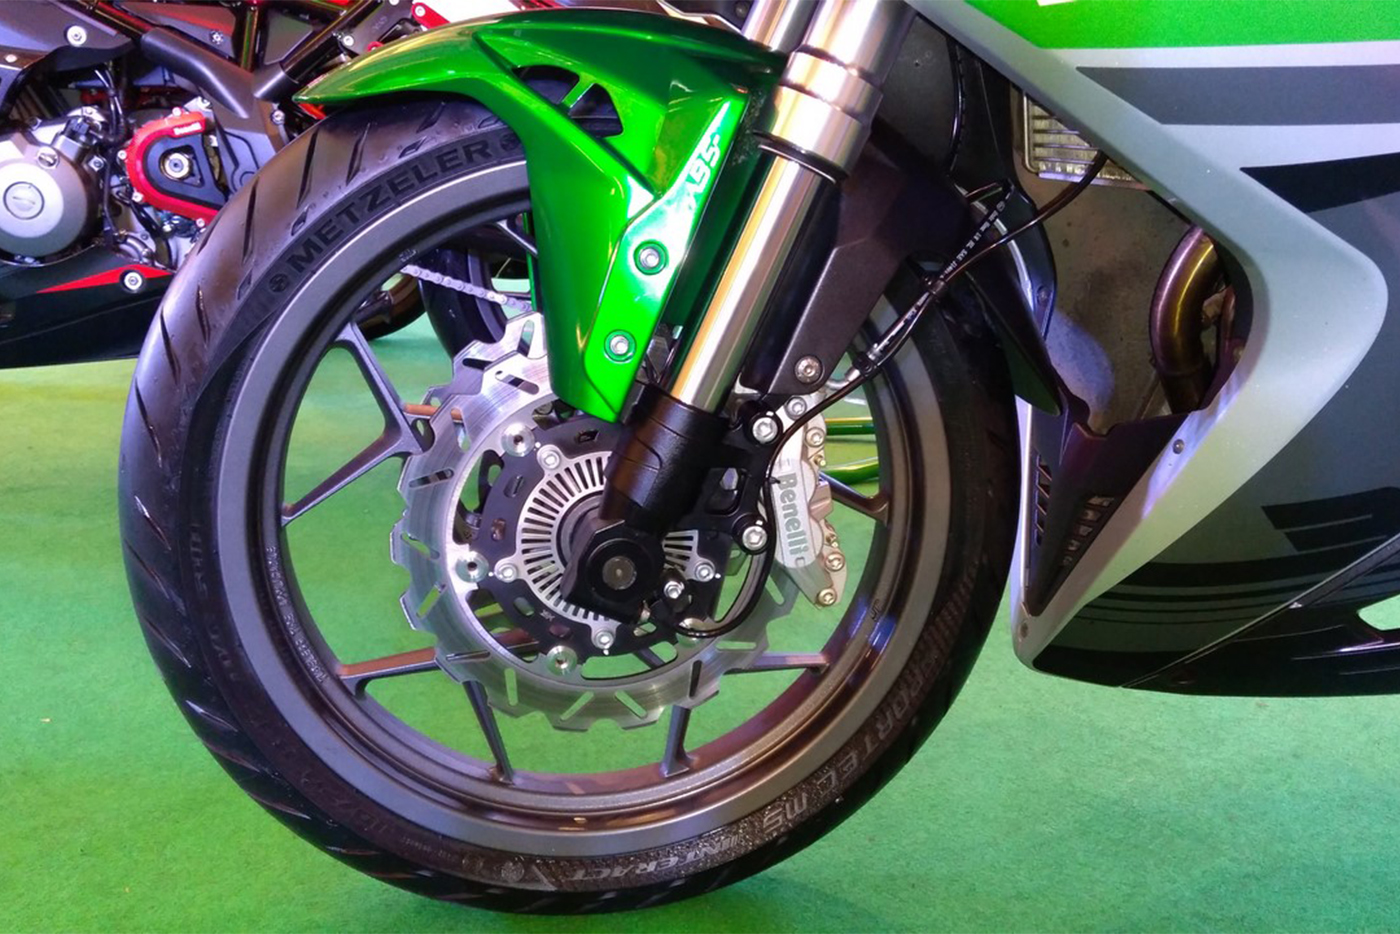 dsk-benelli-302r-front-wheel-side-view-indian-launch.jpg